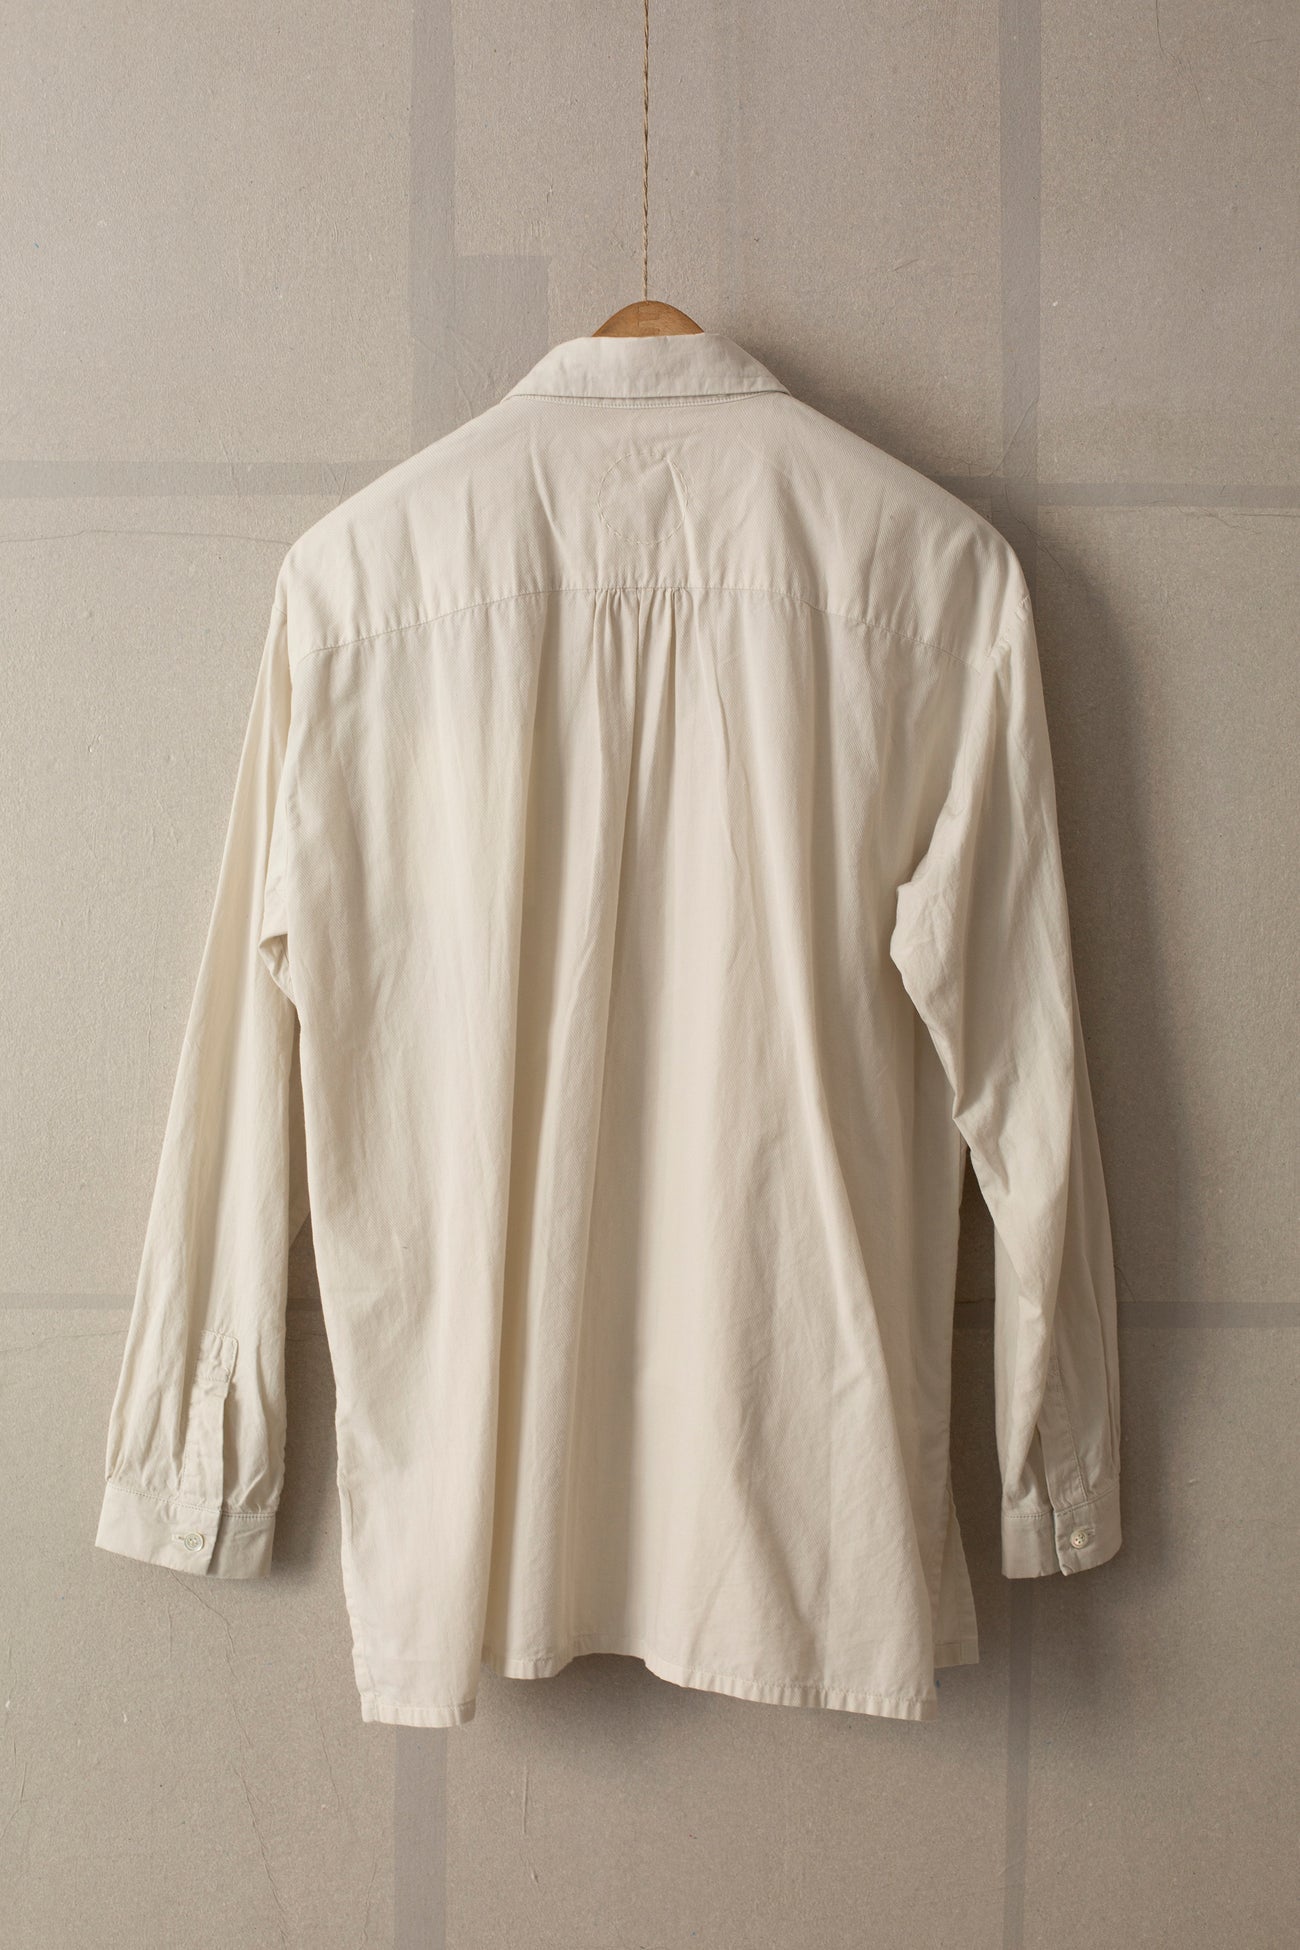 Ancient Long Sleeved Shirt by Cosmic Wonder